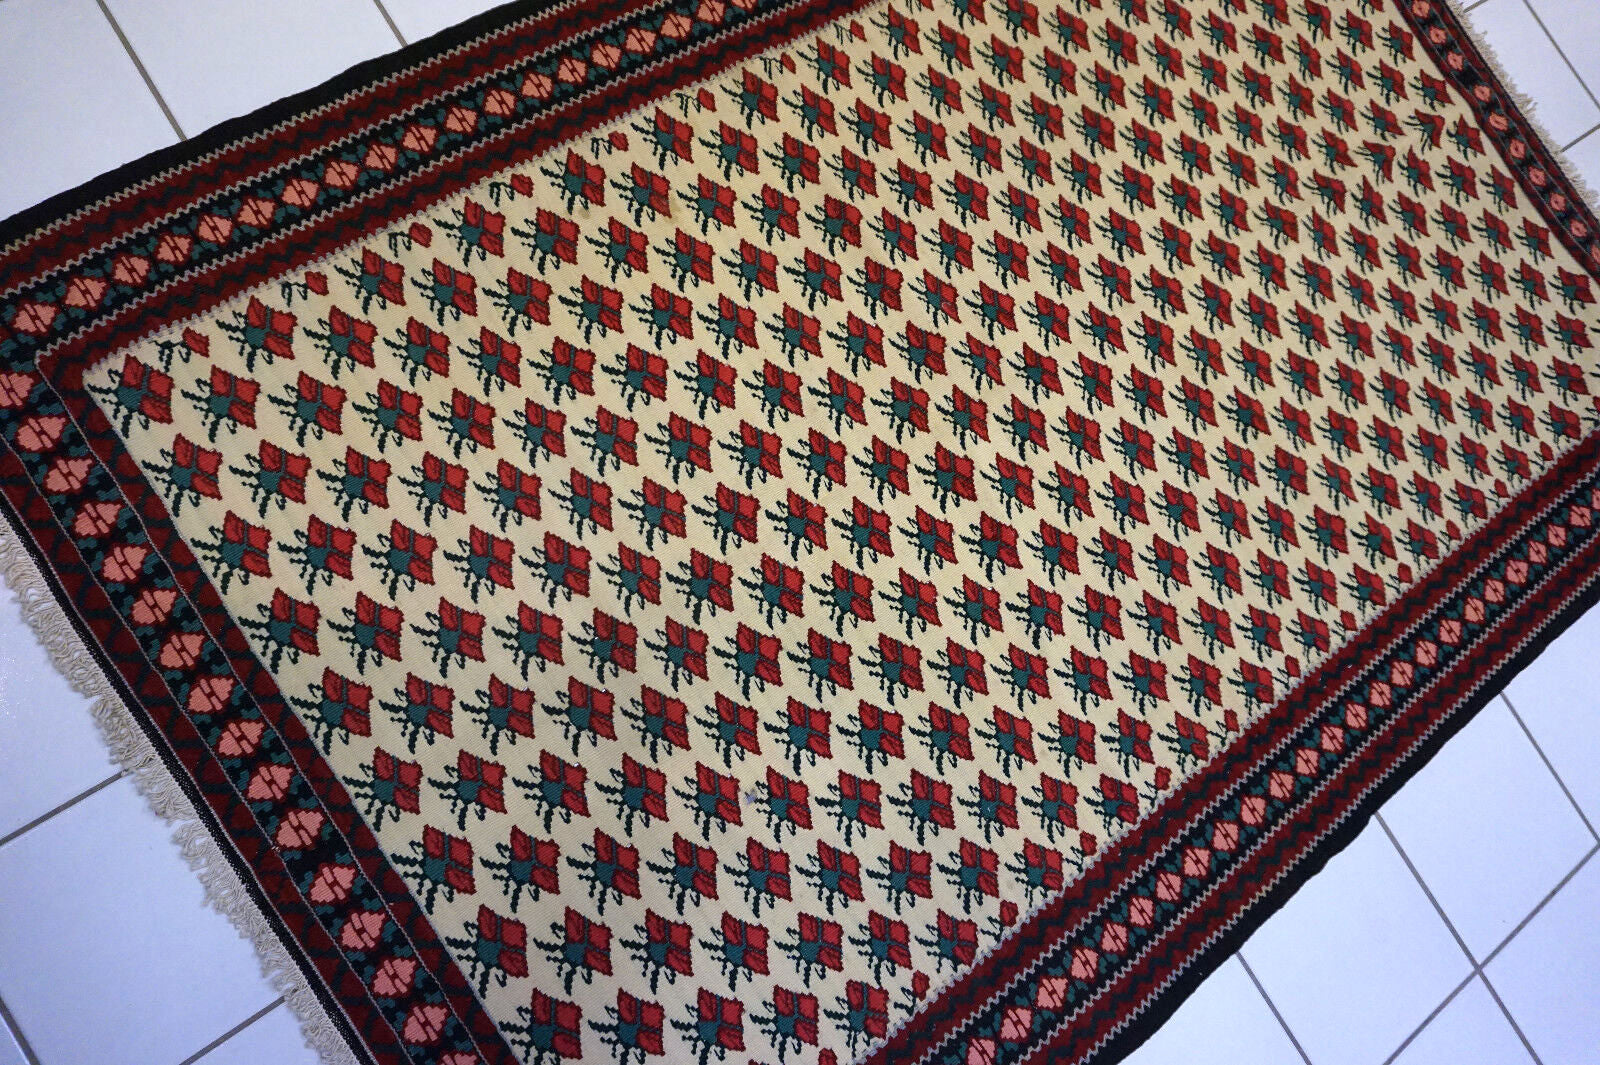 Vintage Persian kilim rug with beautiful color combinations and geometric shapes